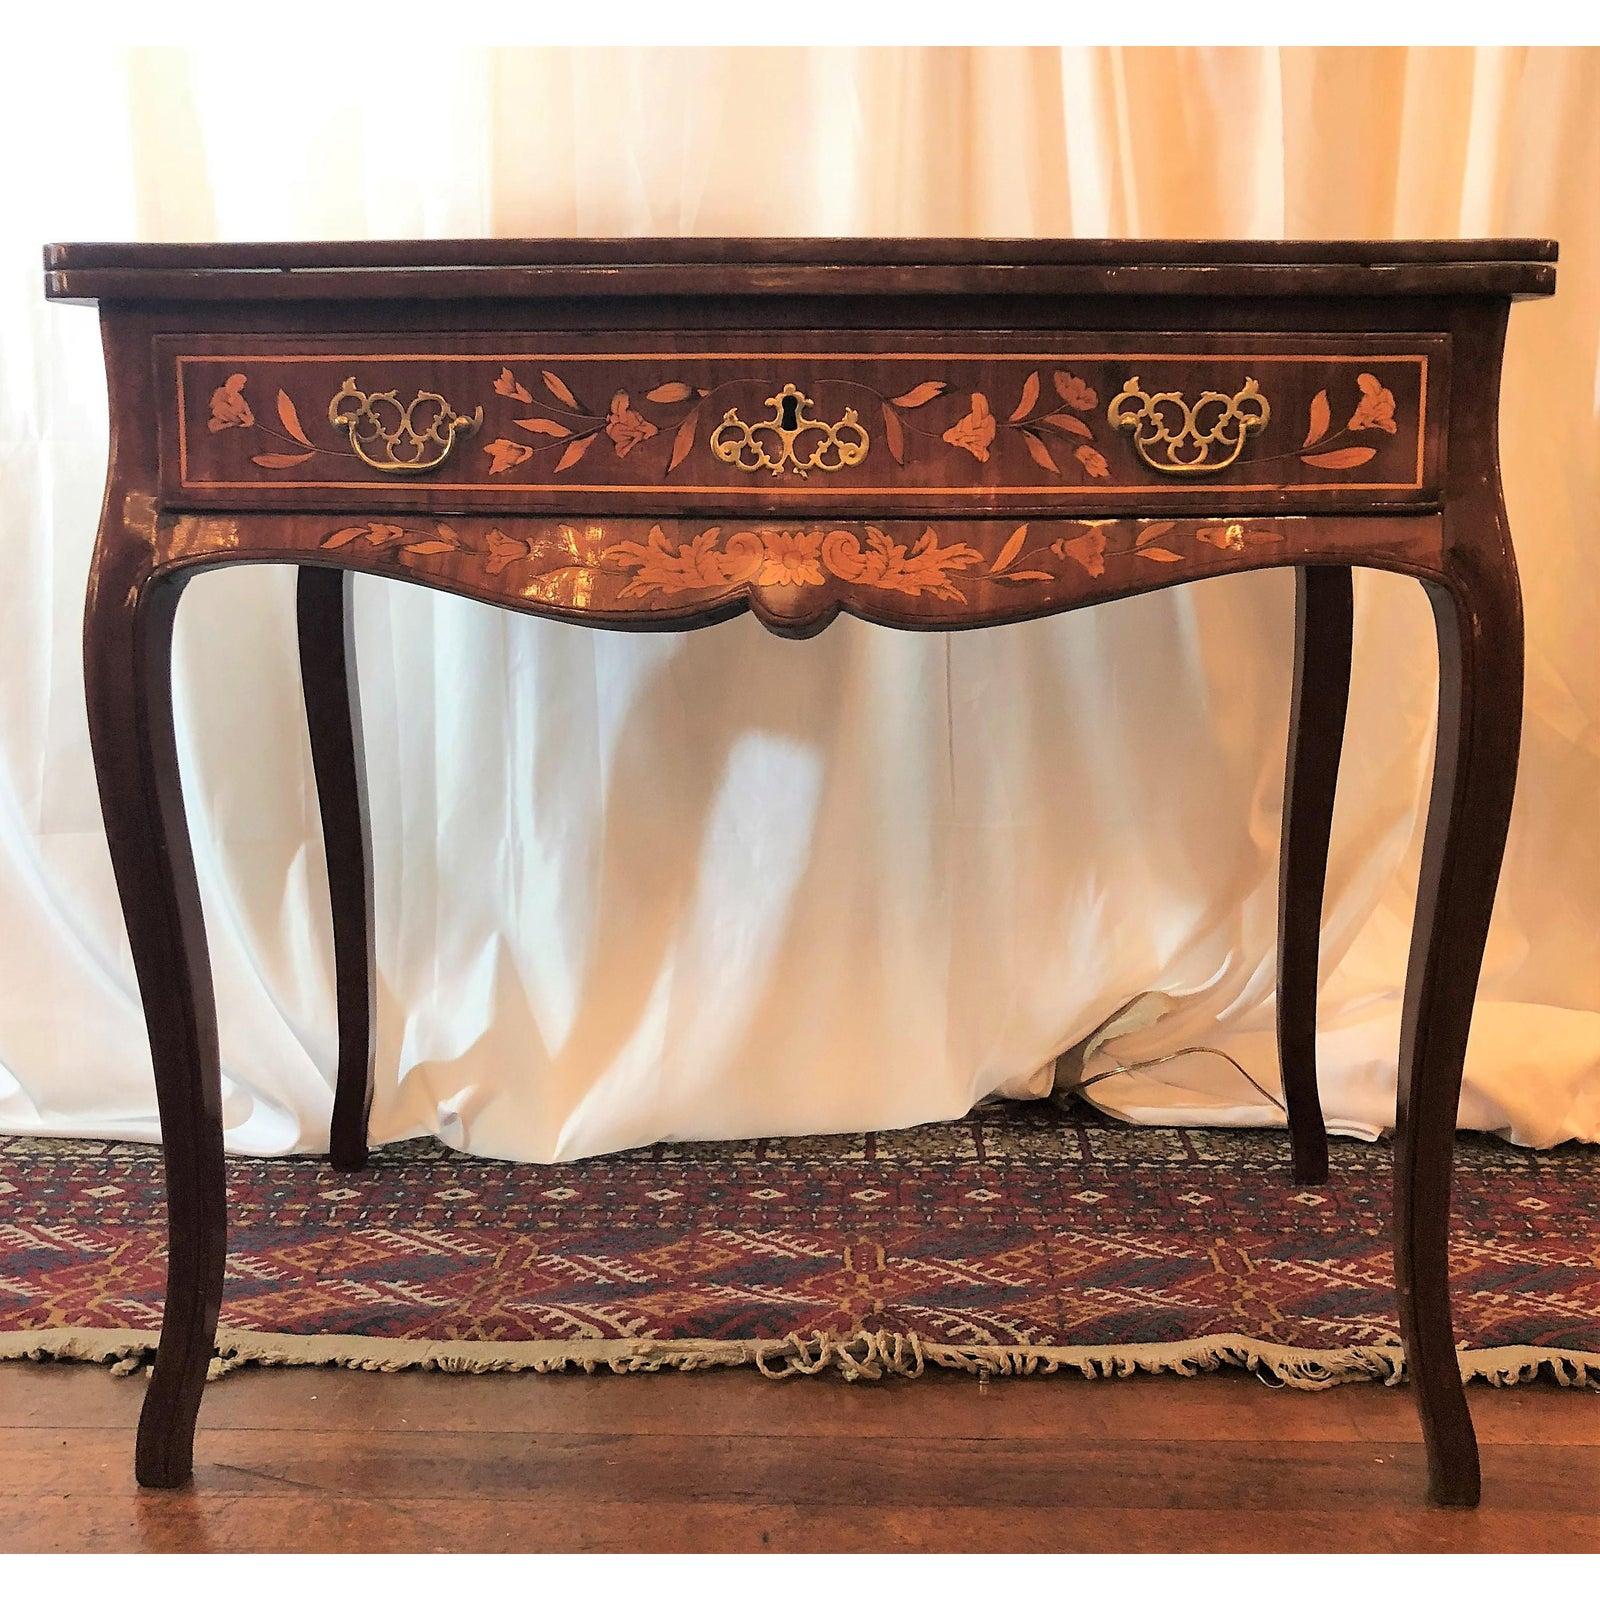 Antique 19th century Dutch marquetry games table, with options for backgammon, chess and checkers. It is beautifully finished. Such a handsome piece!

